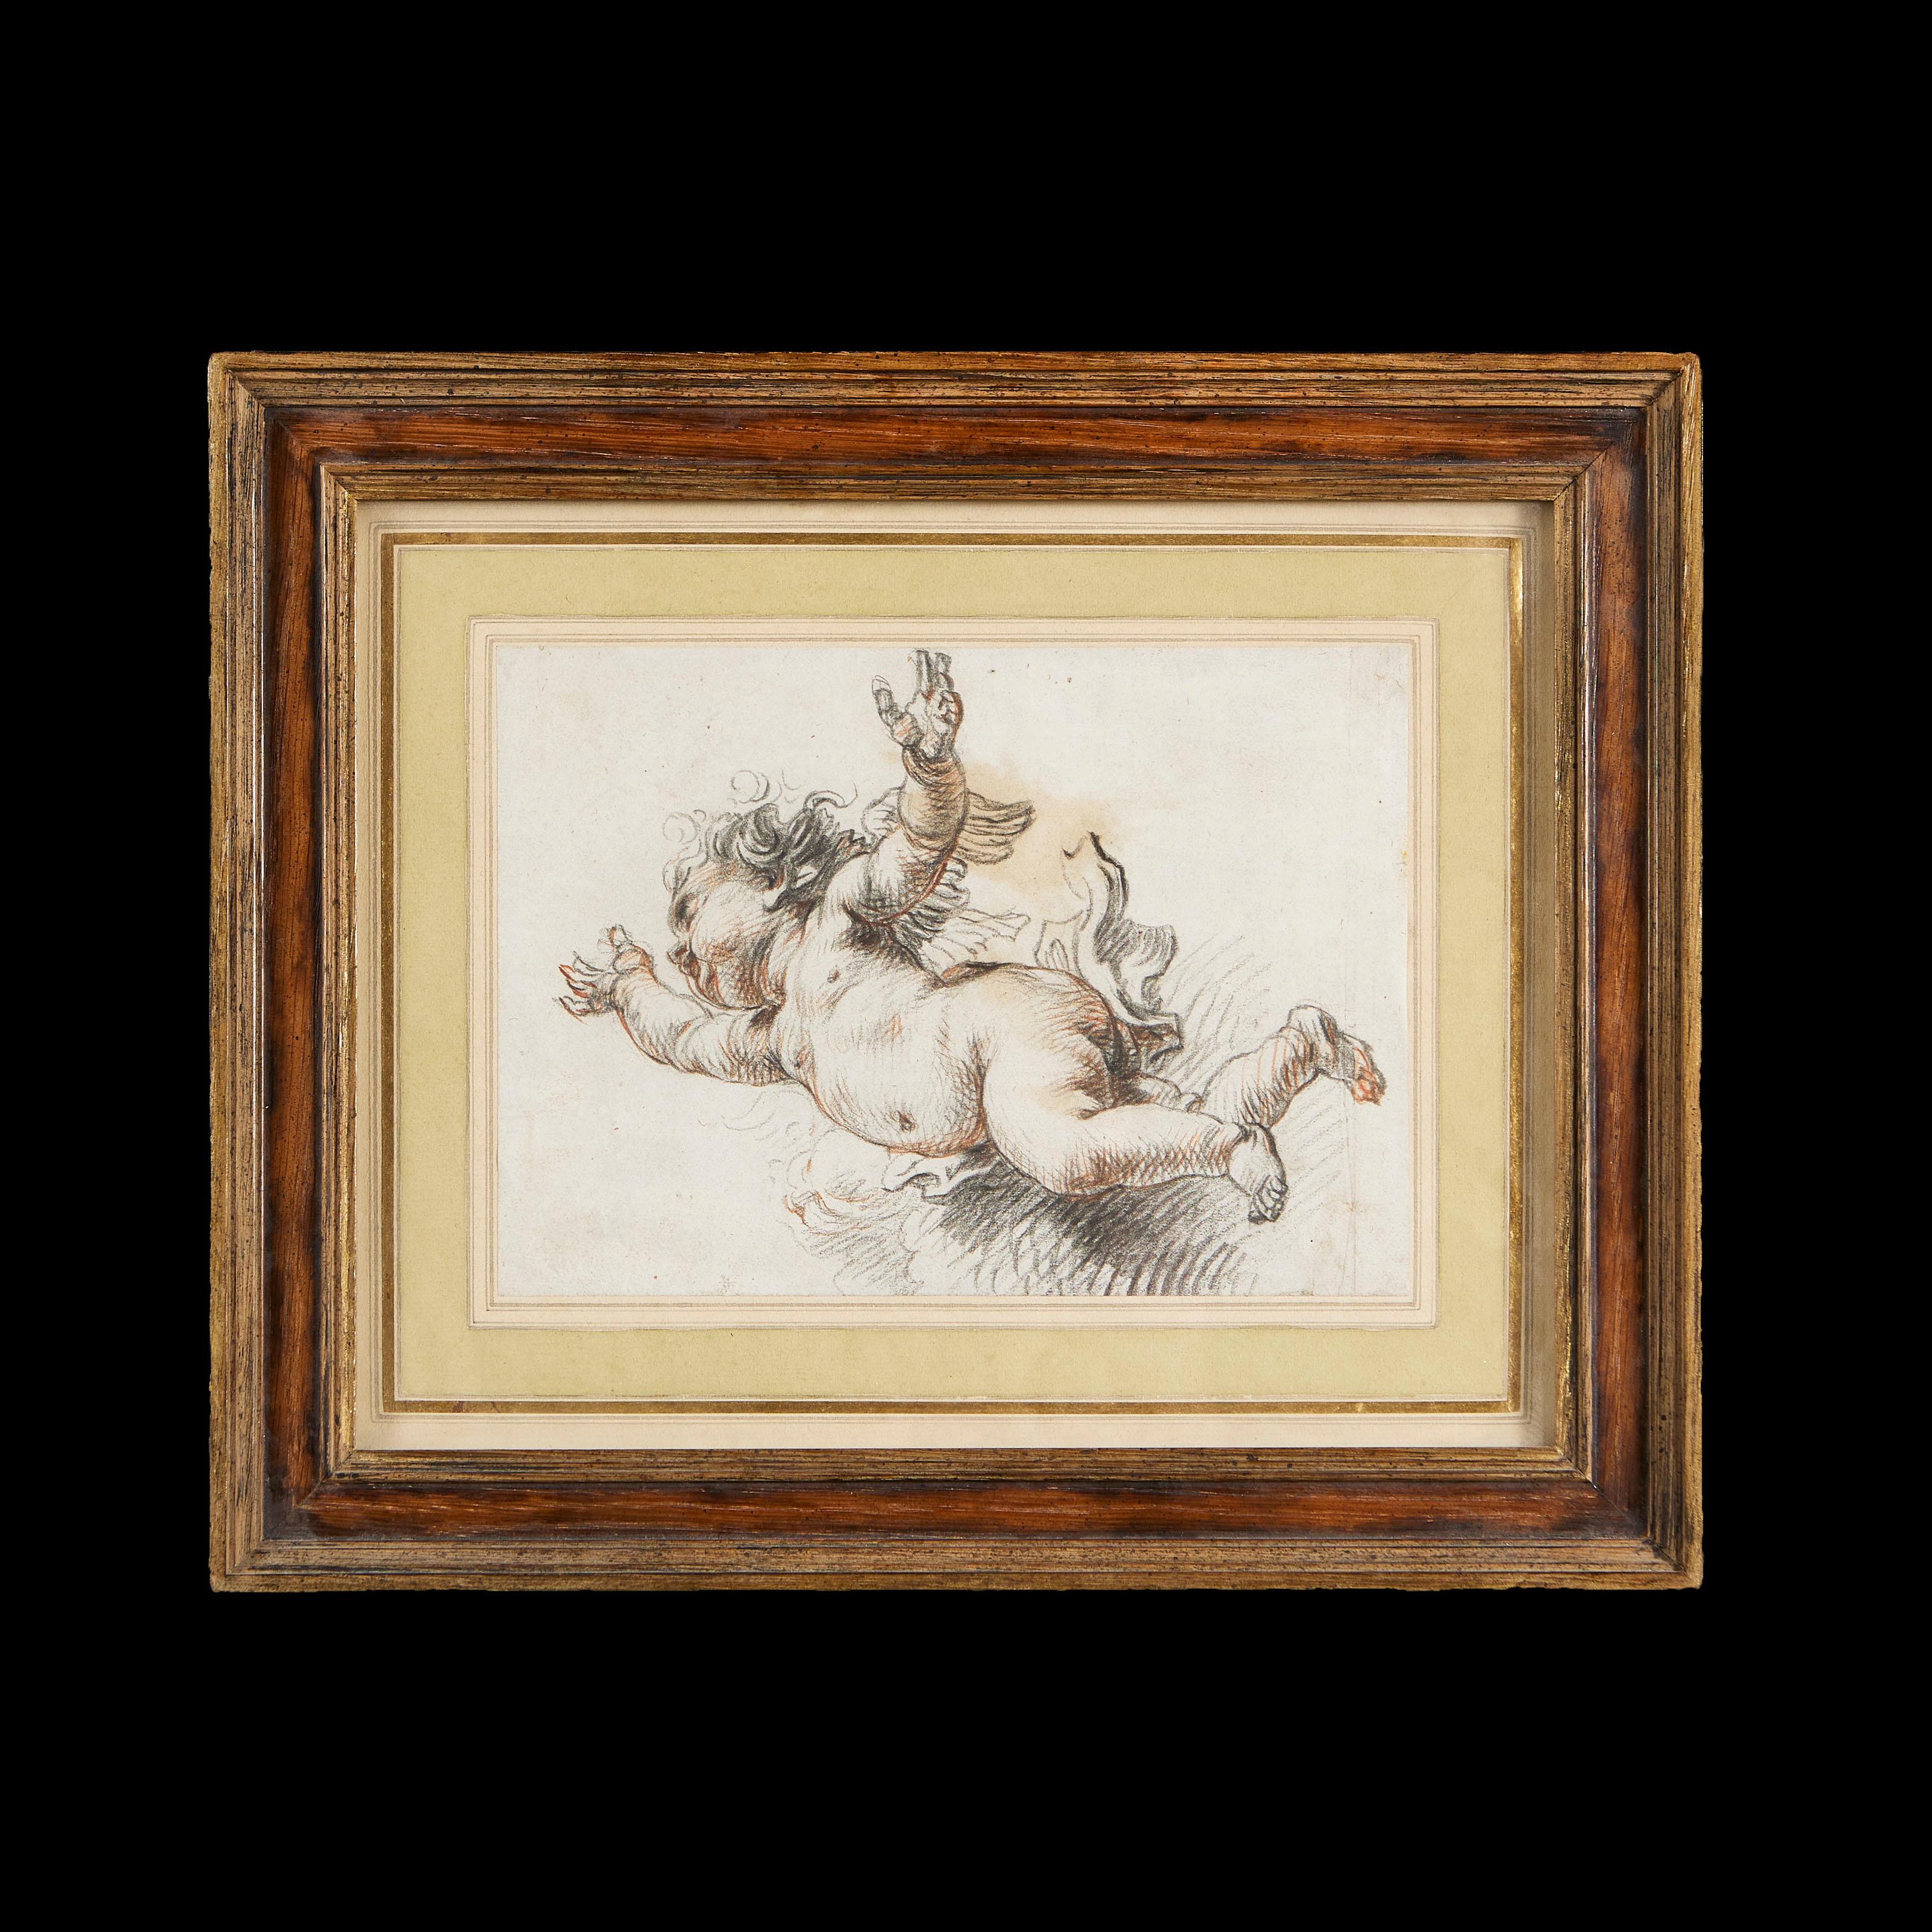 Italy, circa 1750

A mid eighteenth century drawing of a winged putto with arms outstretched, in the manner of Michelangelo. Executed in black and red chalk. Framed and glazed.

Measures: Height 29.00cm
Width 34.50cm.